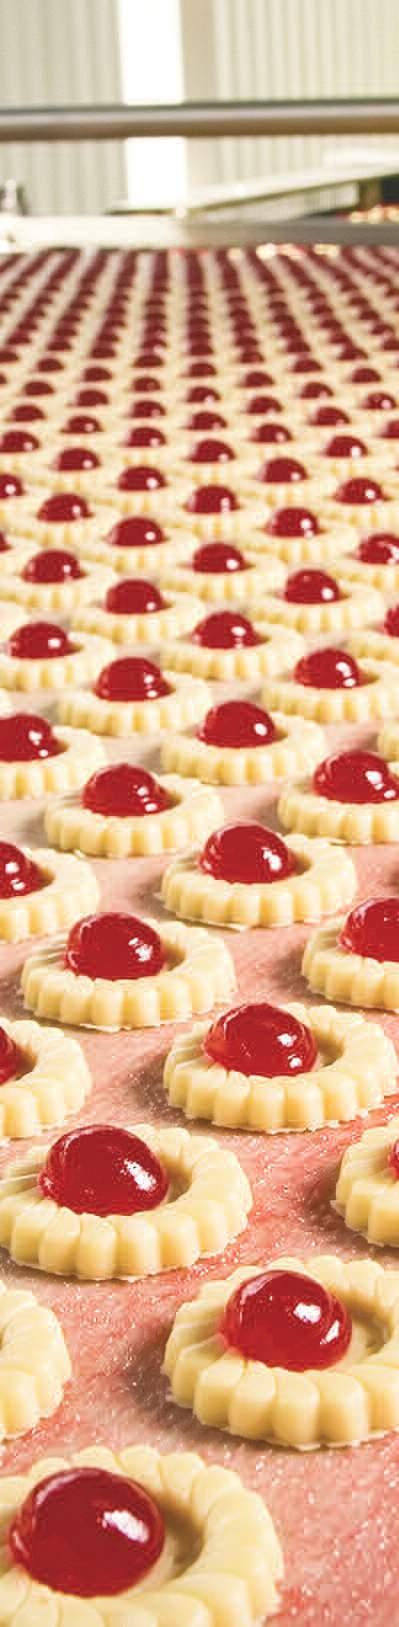 Product and Ingredient Coating Repeatable results through spray control Consistency of the final product is essential in all food and bakery processes, therefore achieving controlled and repeatable